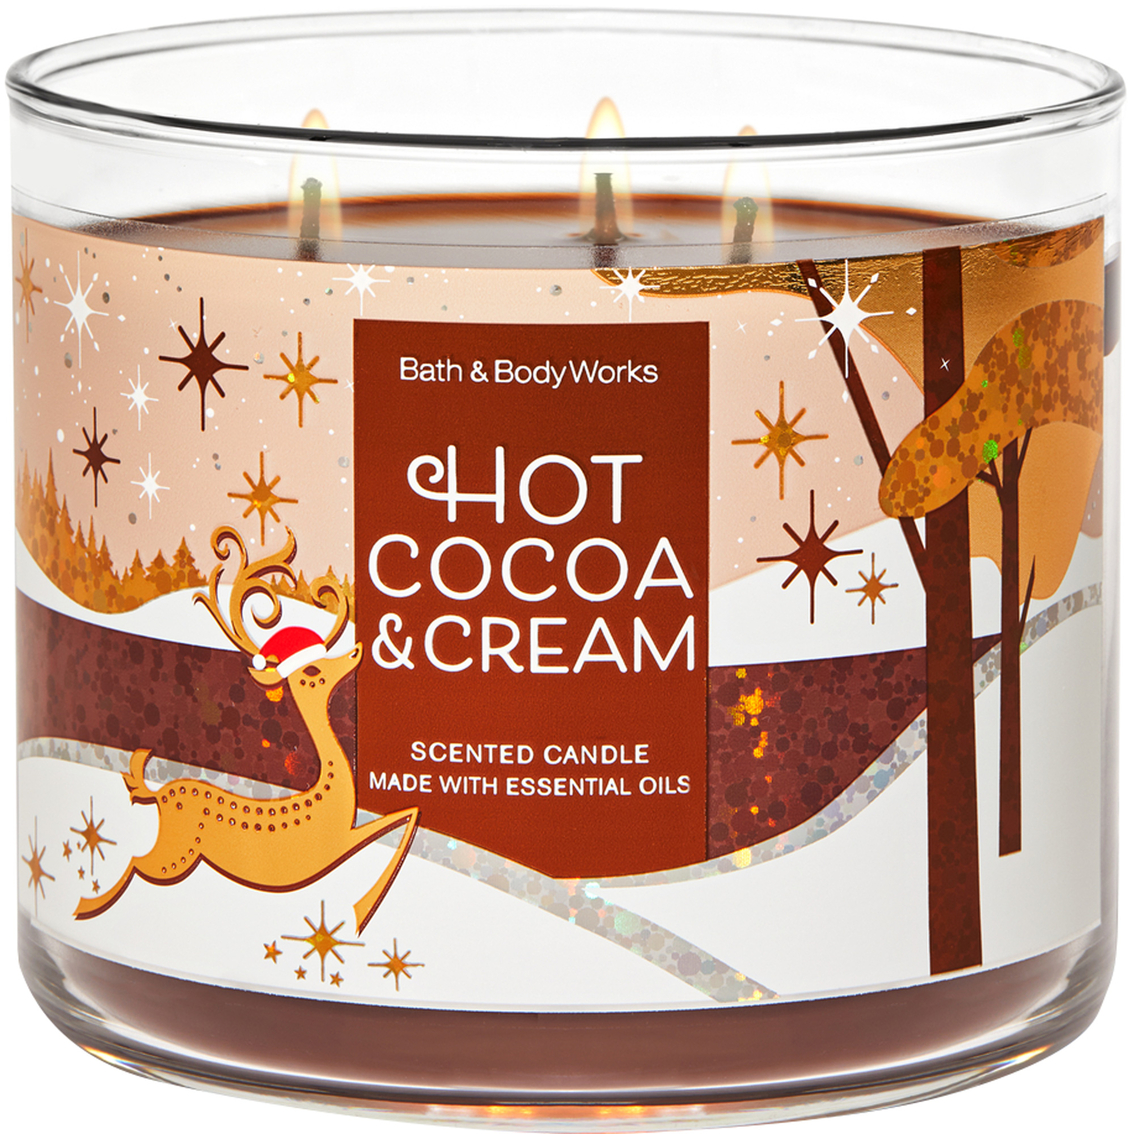 1 Bath & Body Works HOT COCOA & CREAM Large 3-Wick Candle 